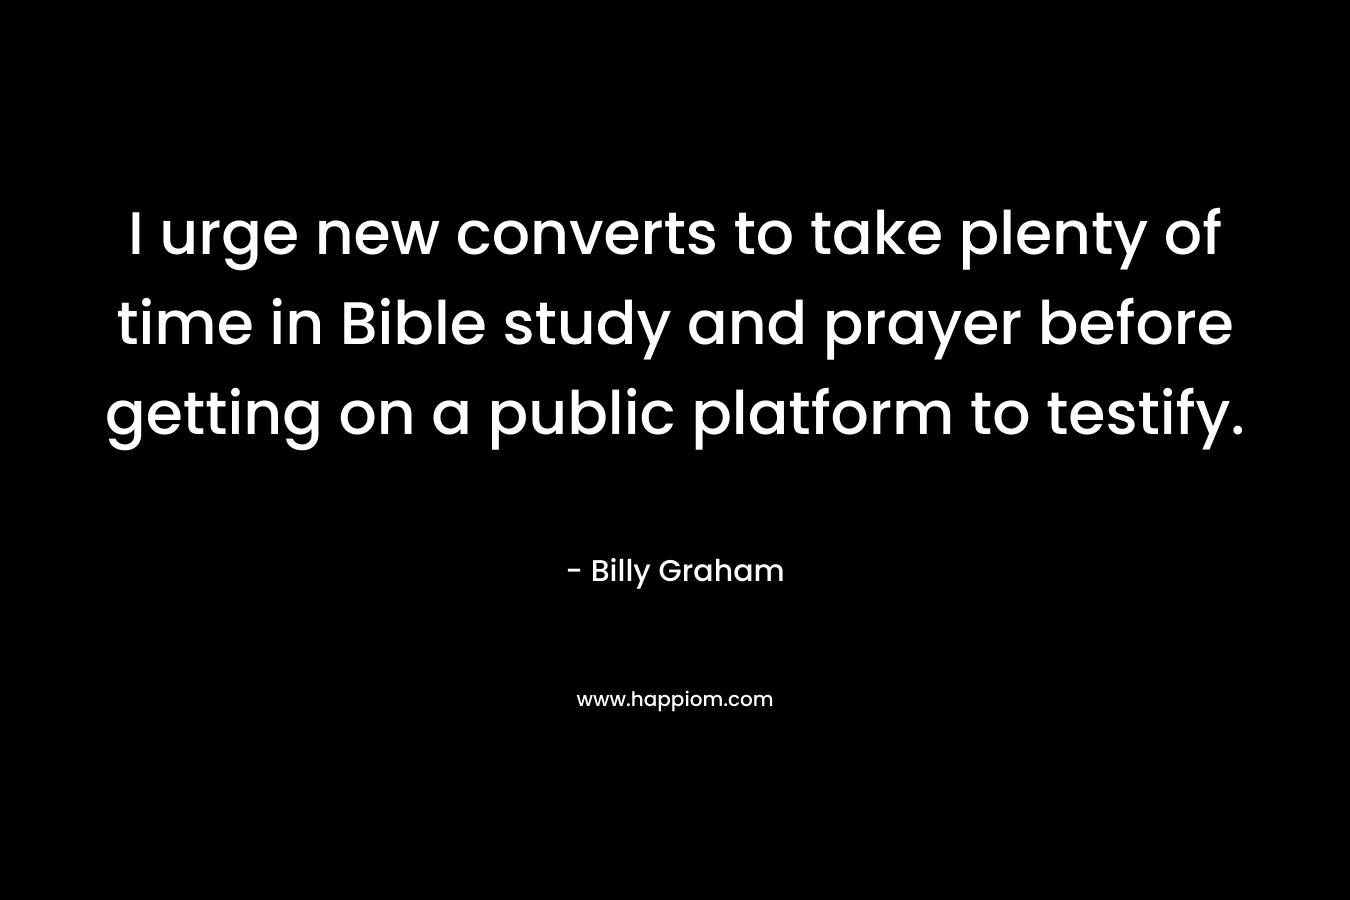 I urge new converts to take plenty of time in Bible study and prayer before getting on a public platform to testify.